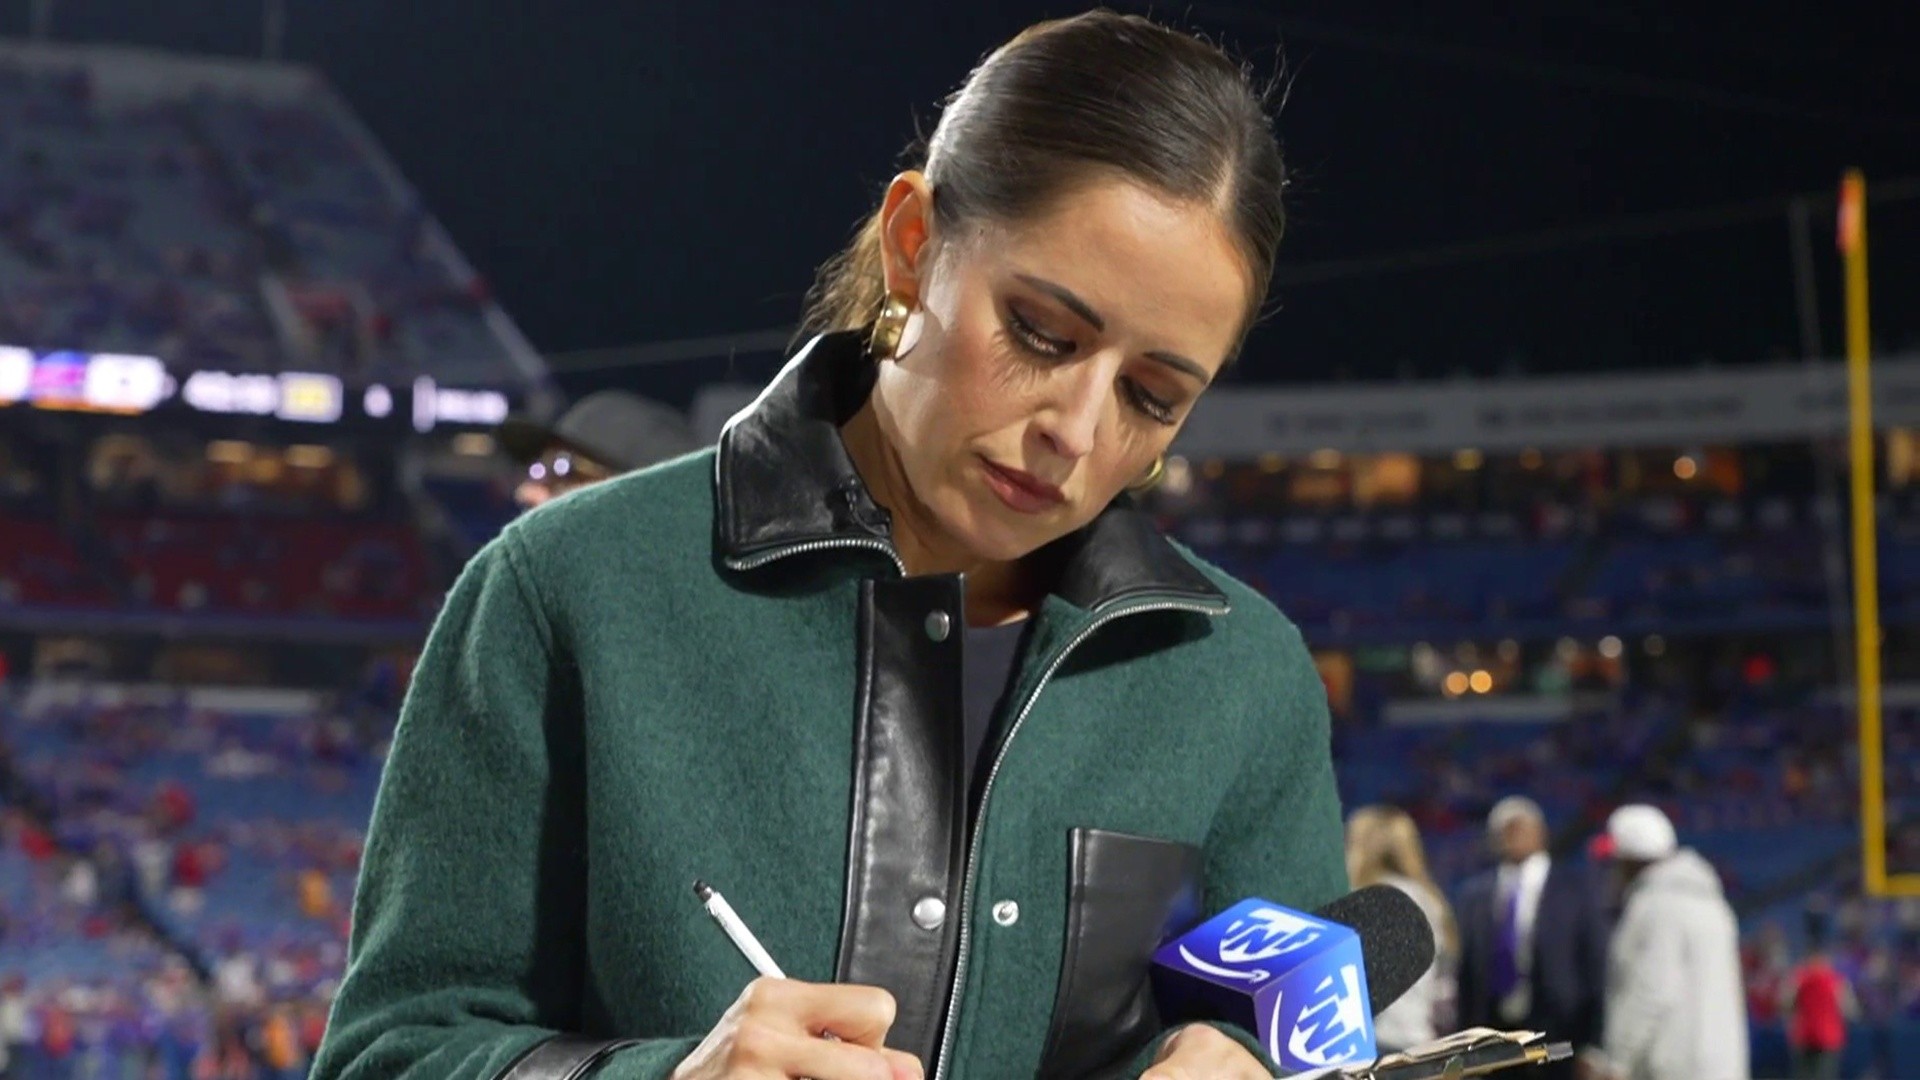 What's it like to report from the NFL sidelines? Get an inside look